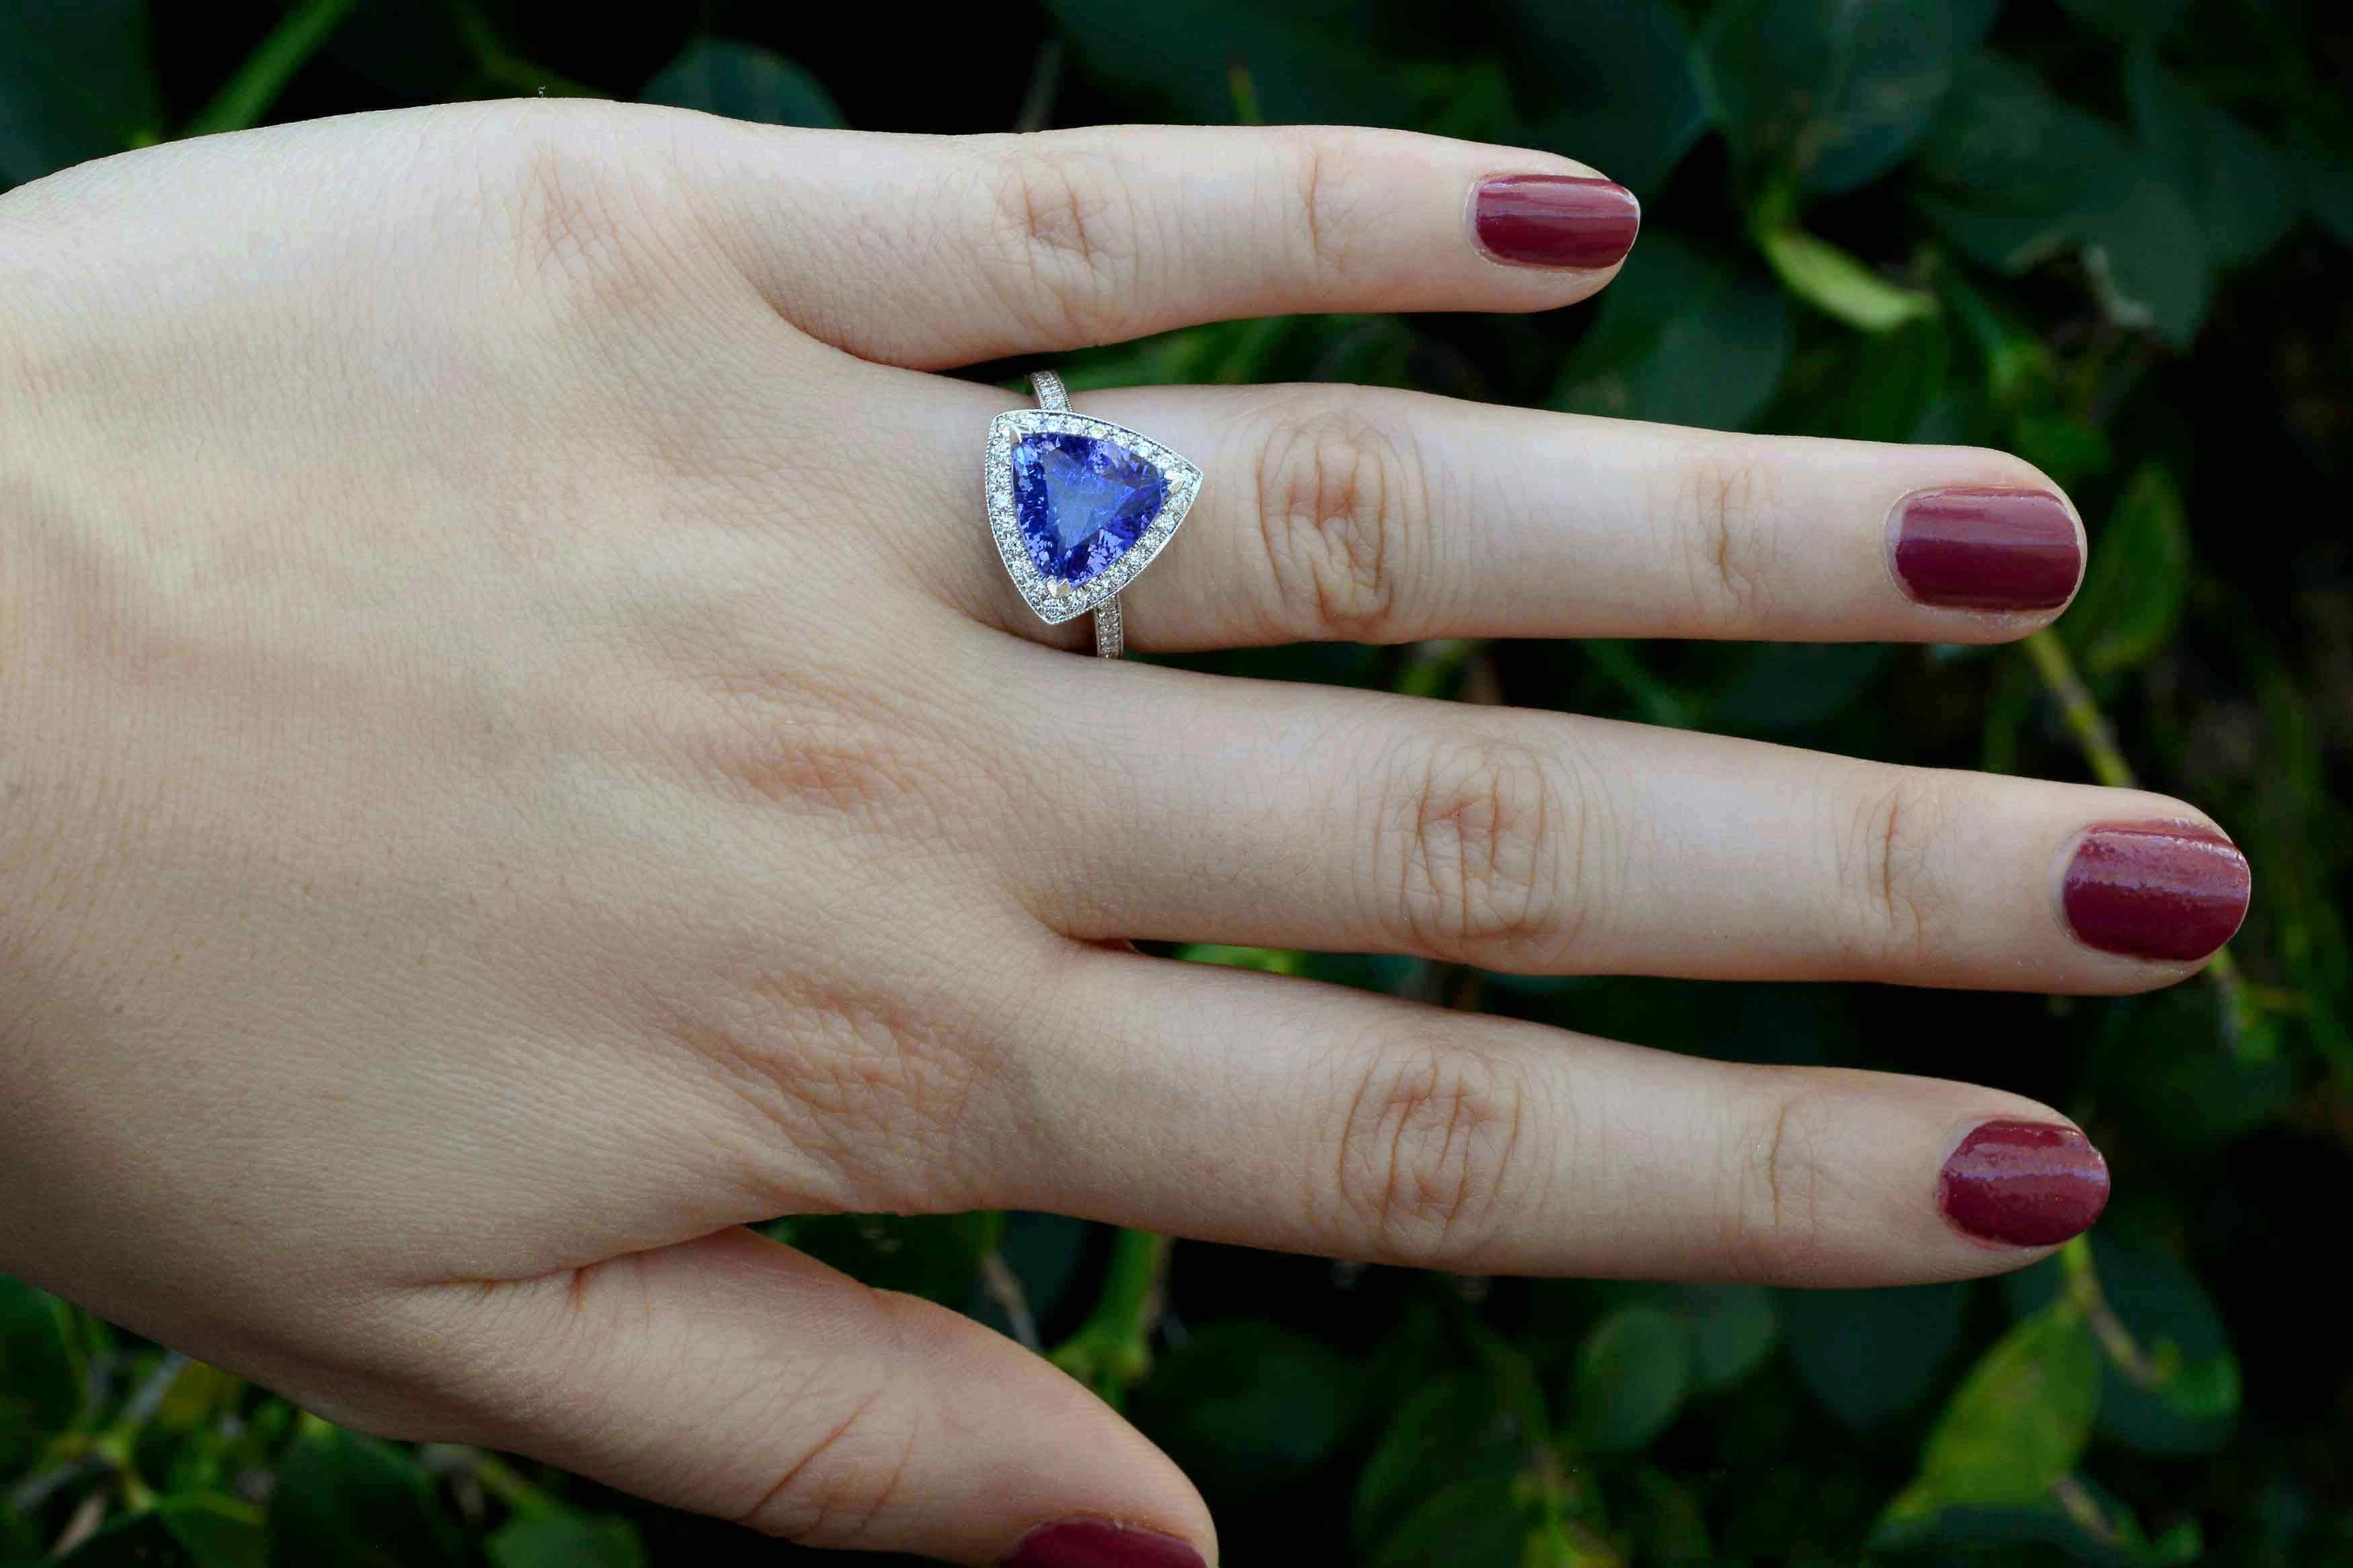 The Oceanside Modern Engagement Ring. At center stage, a triangle ( trillion ) Tanzanite of 3.60 carats, surrounded by a diamond halo and band. A most captivating, velvety, violet-blue gemstone with glimmering accents, you'll love the cool angles,